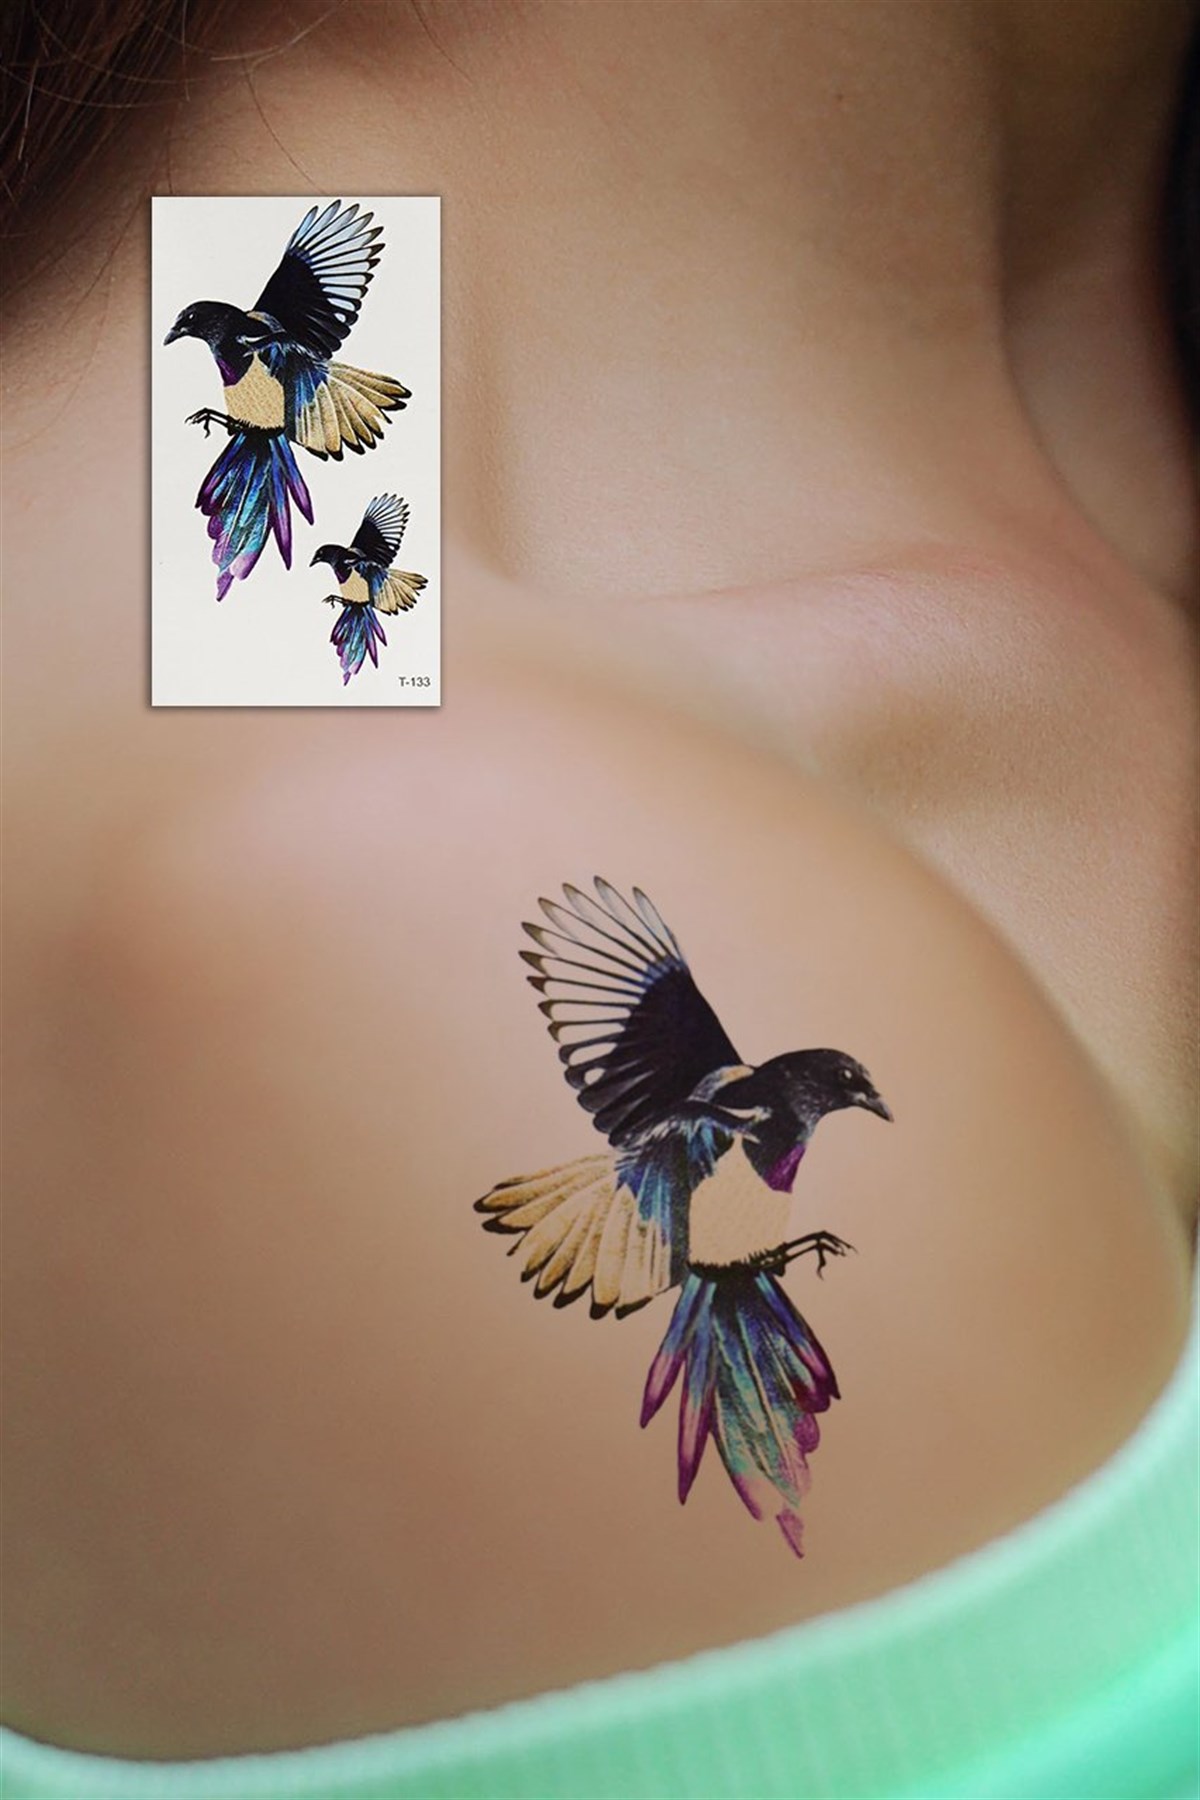 60 Sparkling Birds Tattoo Ideas And Design For Chest That Will Look Elegant   Psycho Tats